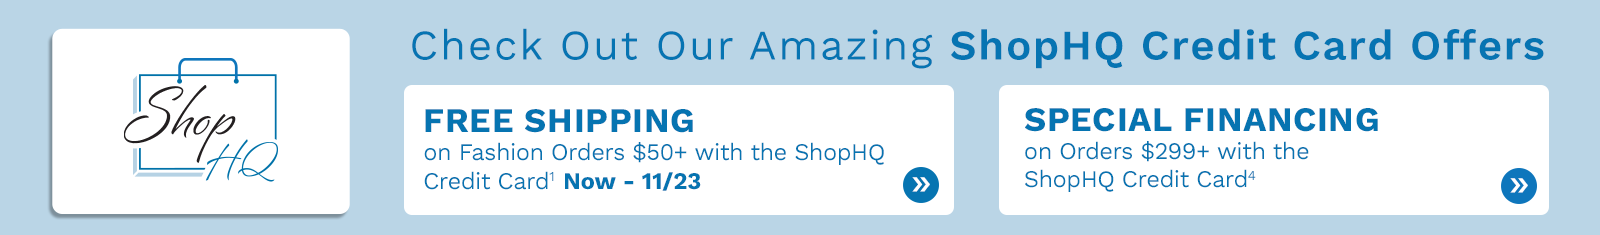 Check Out Our Amazing ShopHQ Credit Card Offers